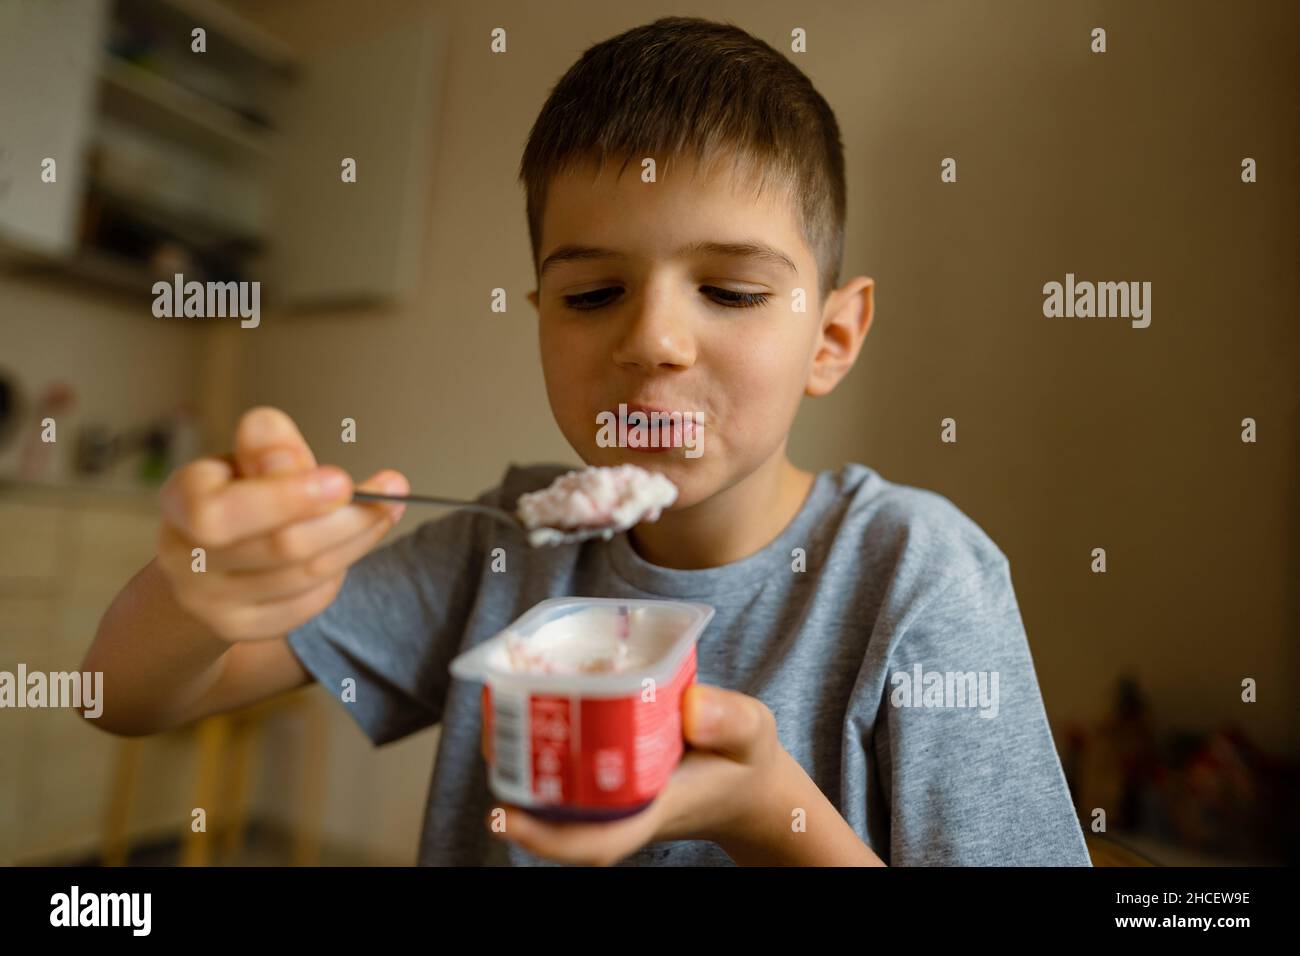 Cute boy with appetite eats yogur with spoon, grimaces. Stock Photo